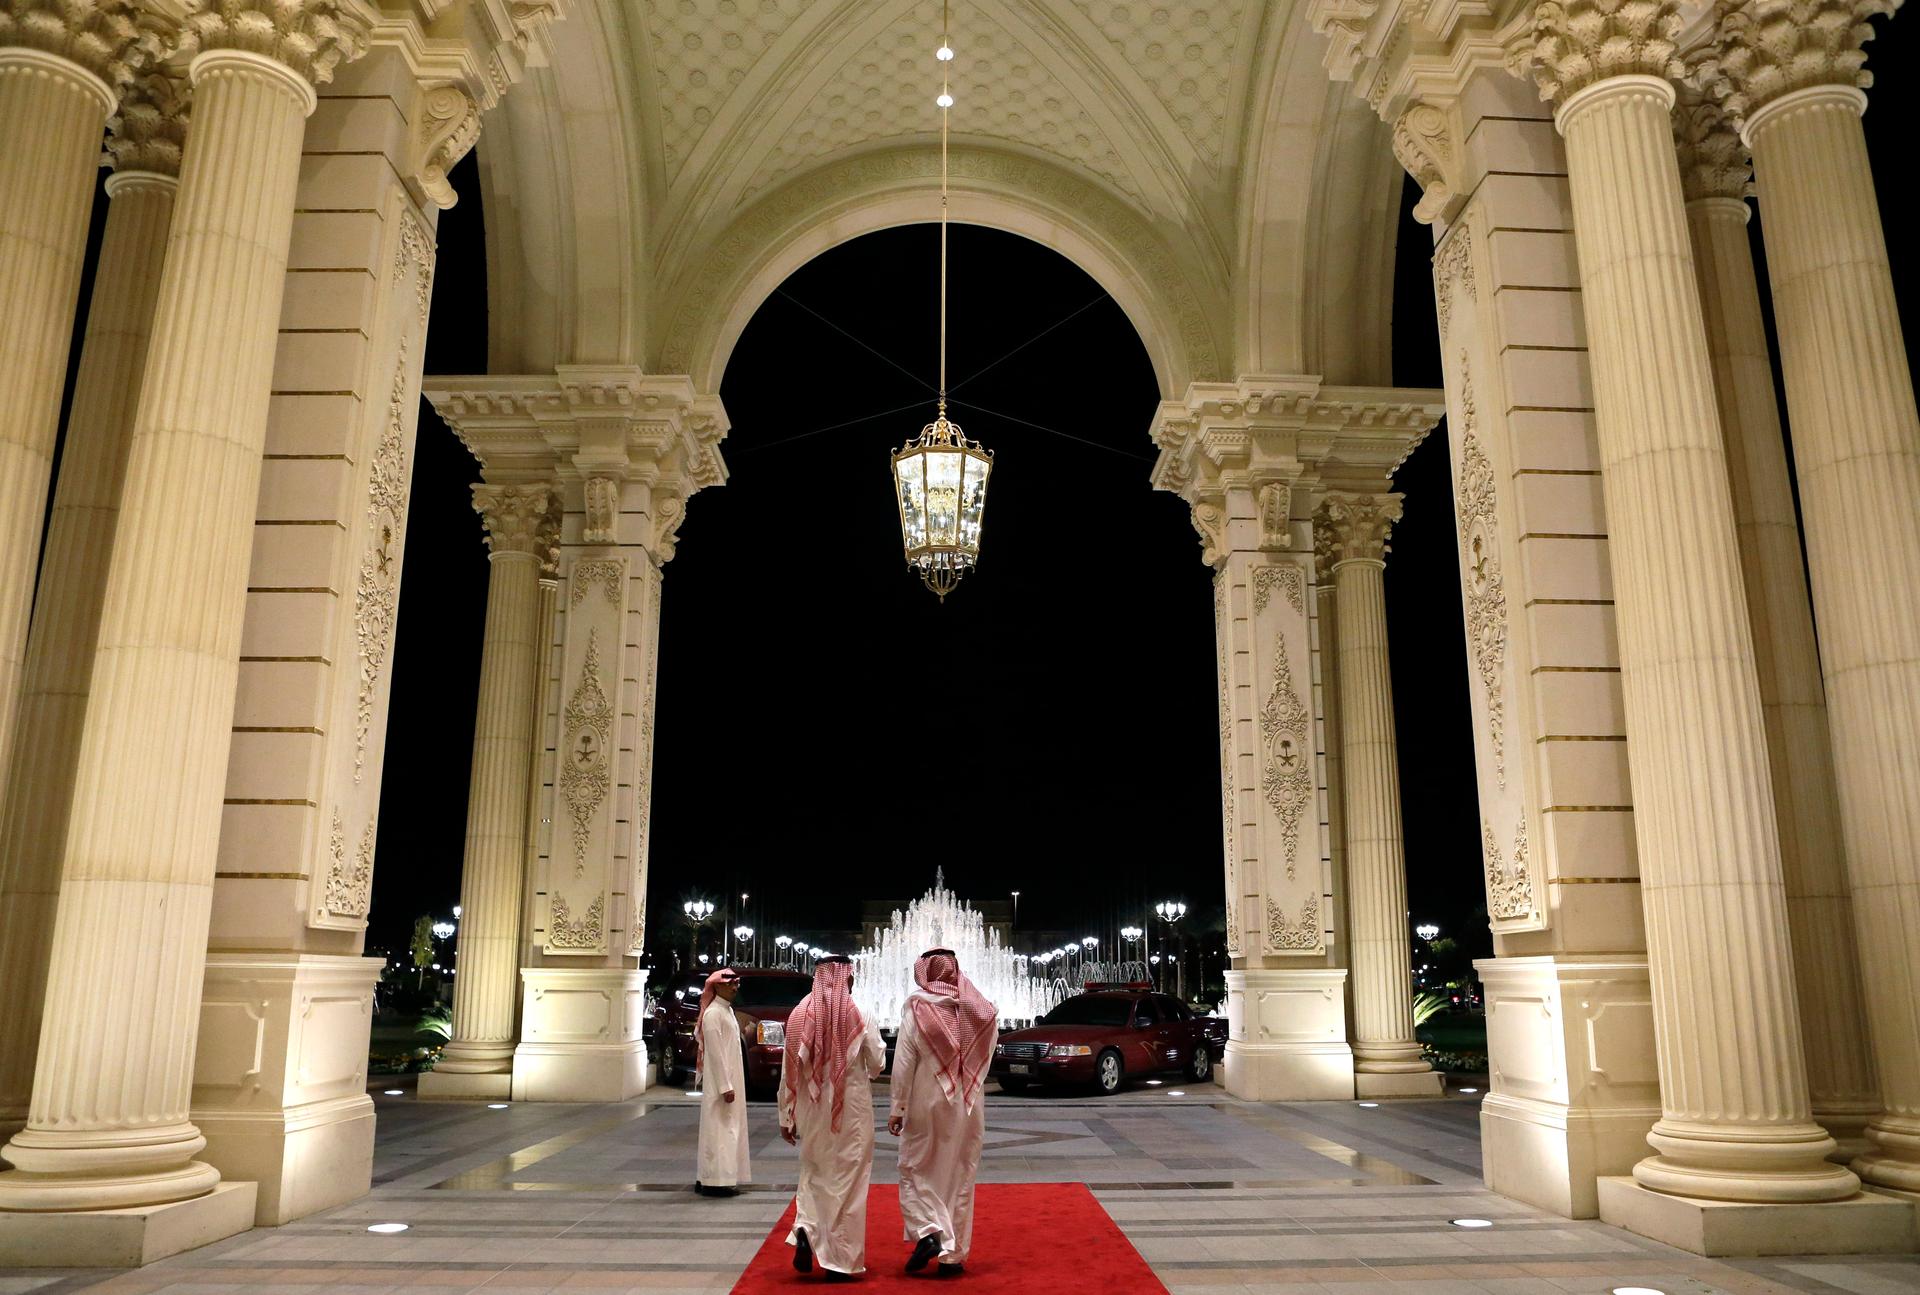 Saudi men walk at the entrance to the Ritz-Carlton Hotel, where U.S. Secretary of State John Kerry is staying in Riyadh March 4, 2013.